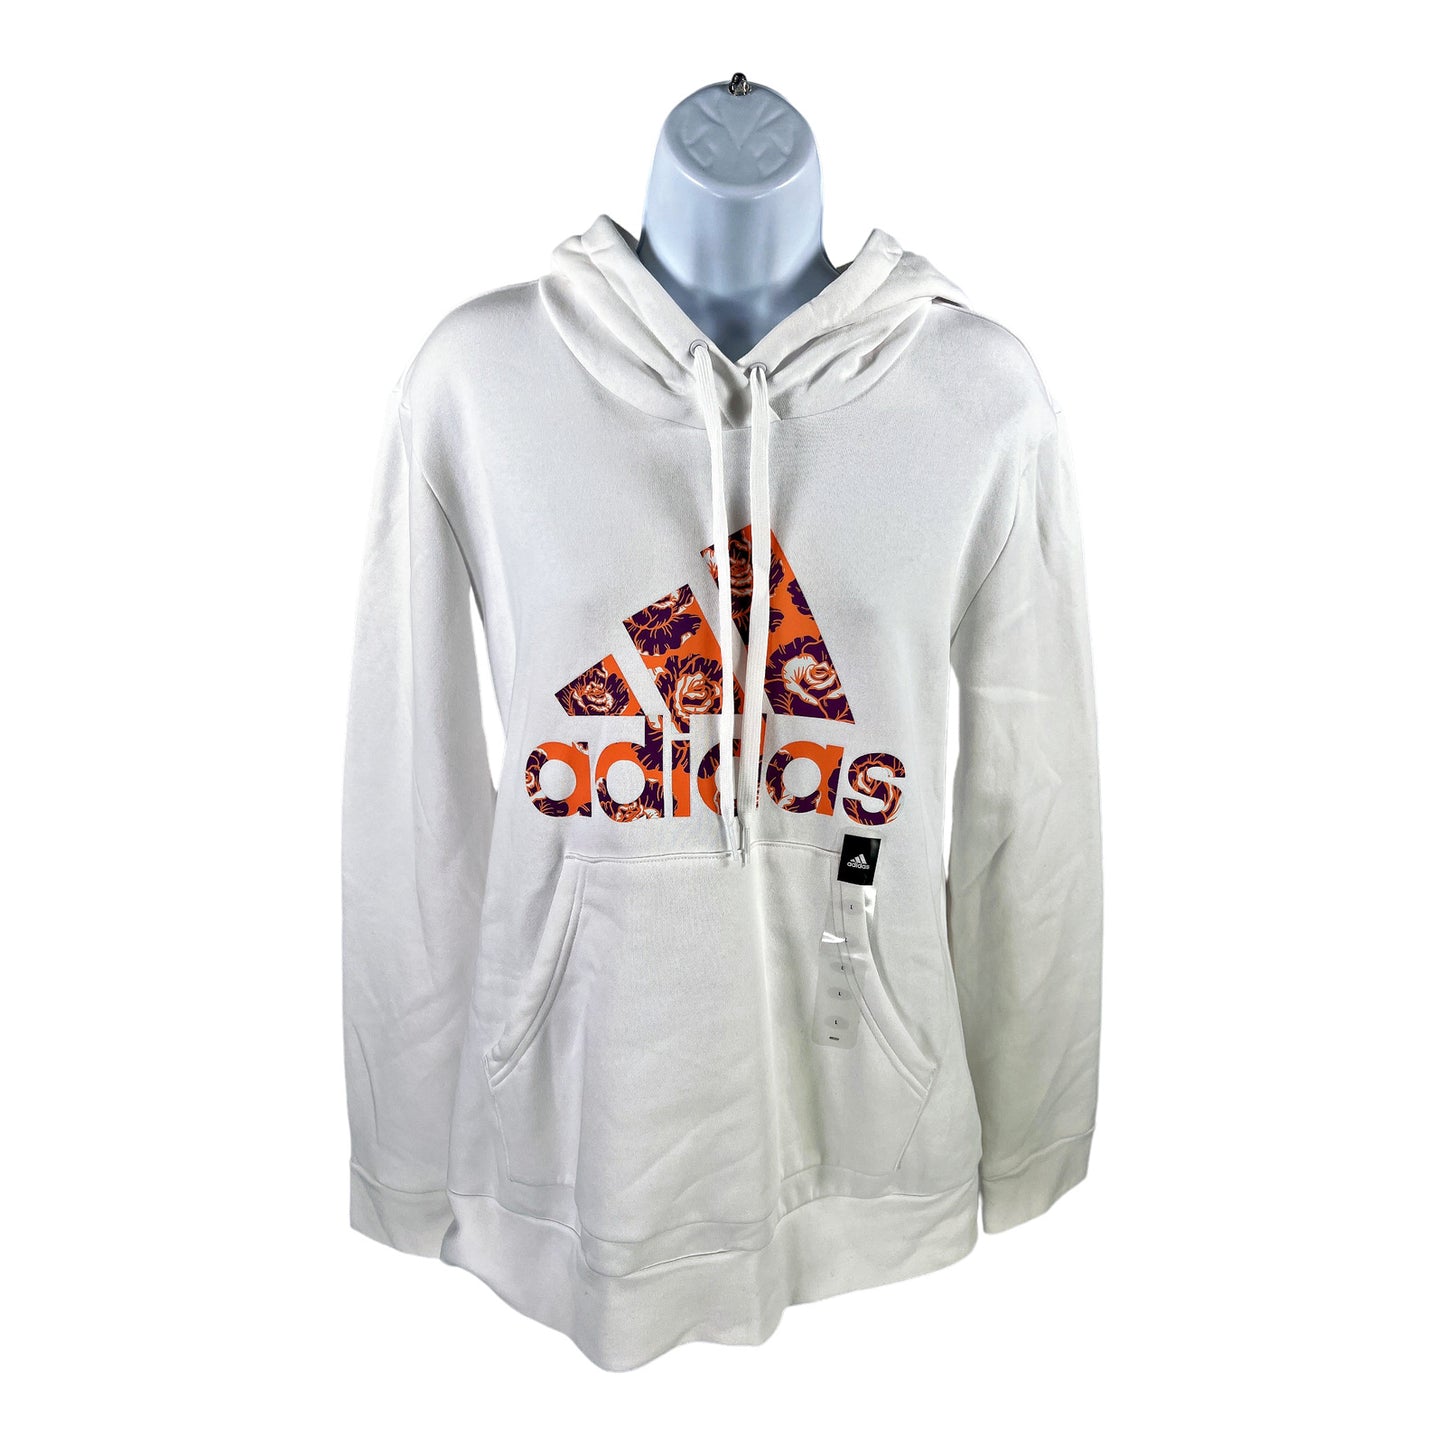 NEW adidas Women’s White Flowery Graphic Pullover Hoodie - L